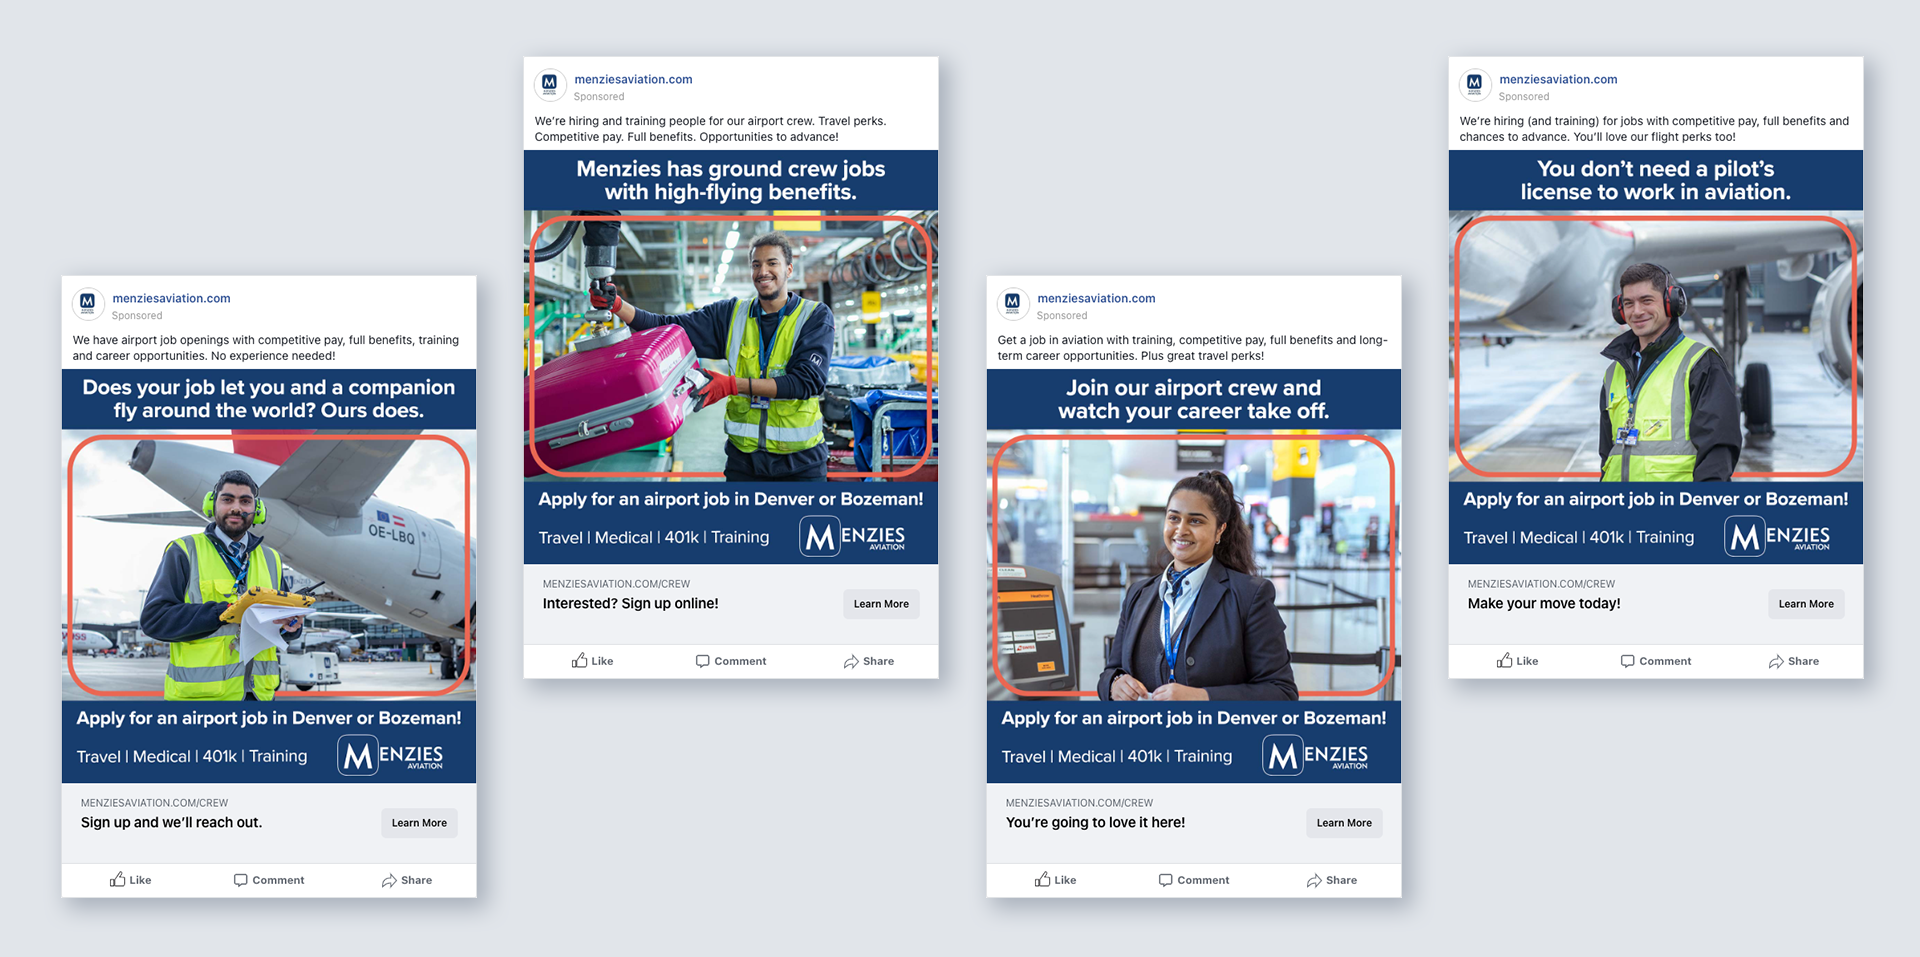 Instagram and Facebook ads created for Menzies to drive job applications